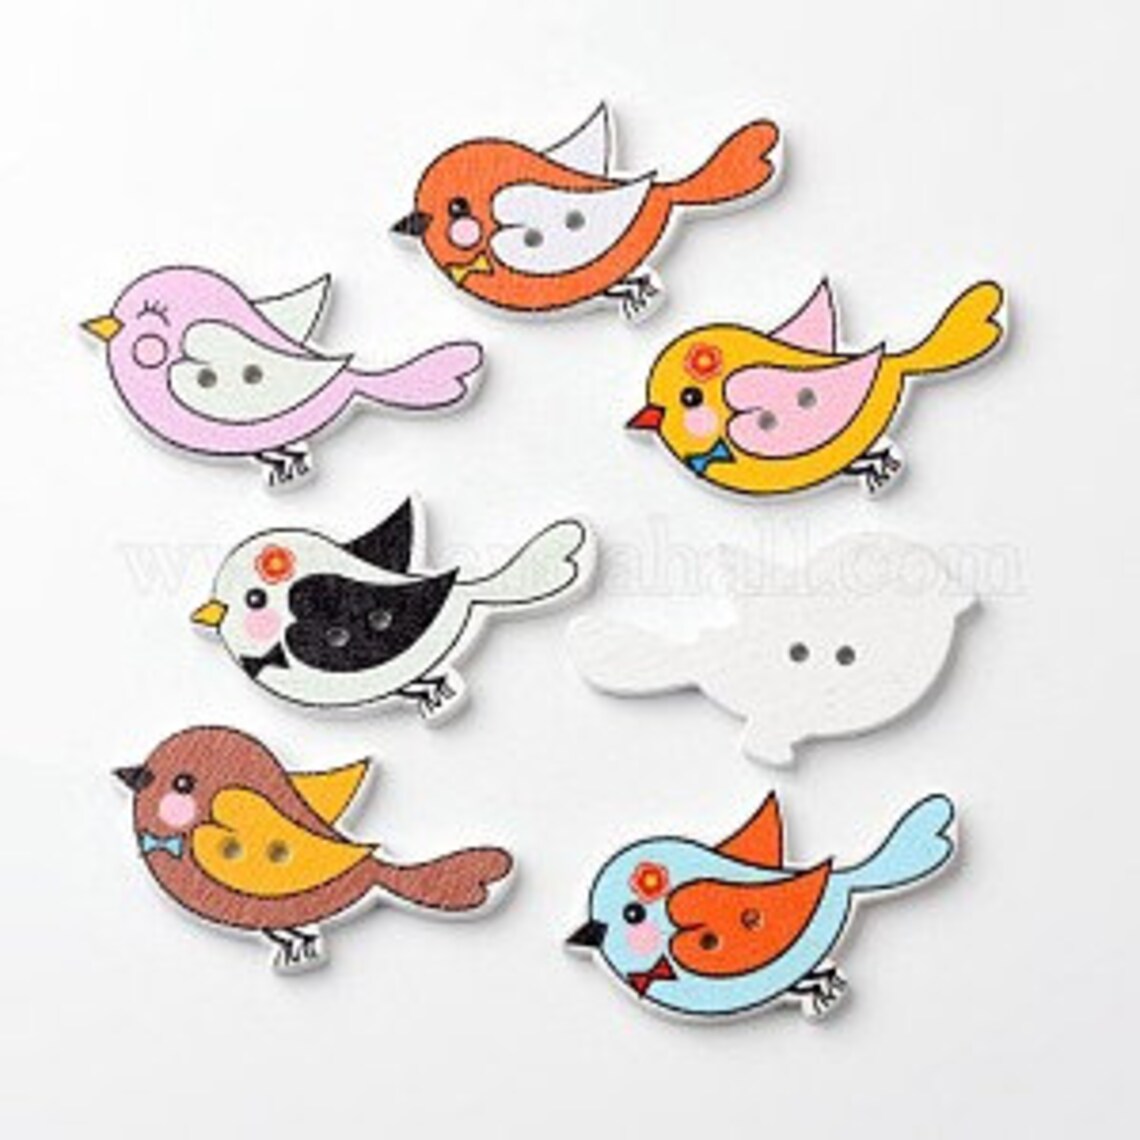 Colorful Birds Printed Wooden Buttons - Set of 6